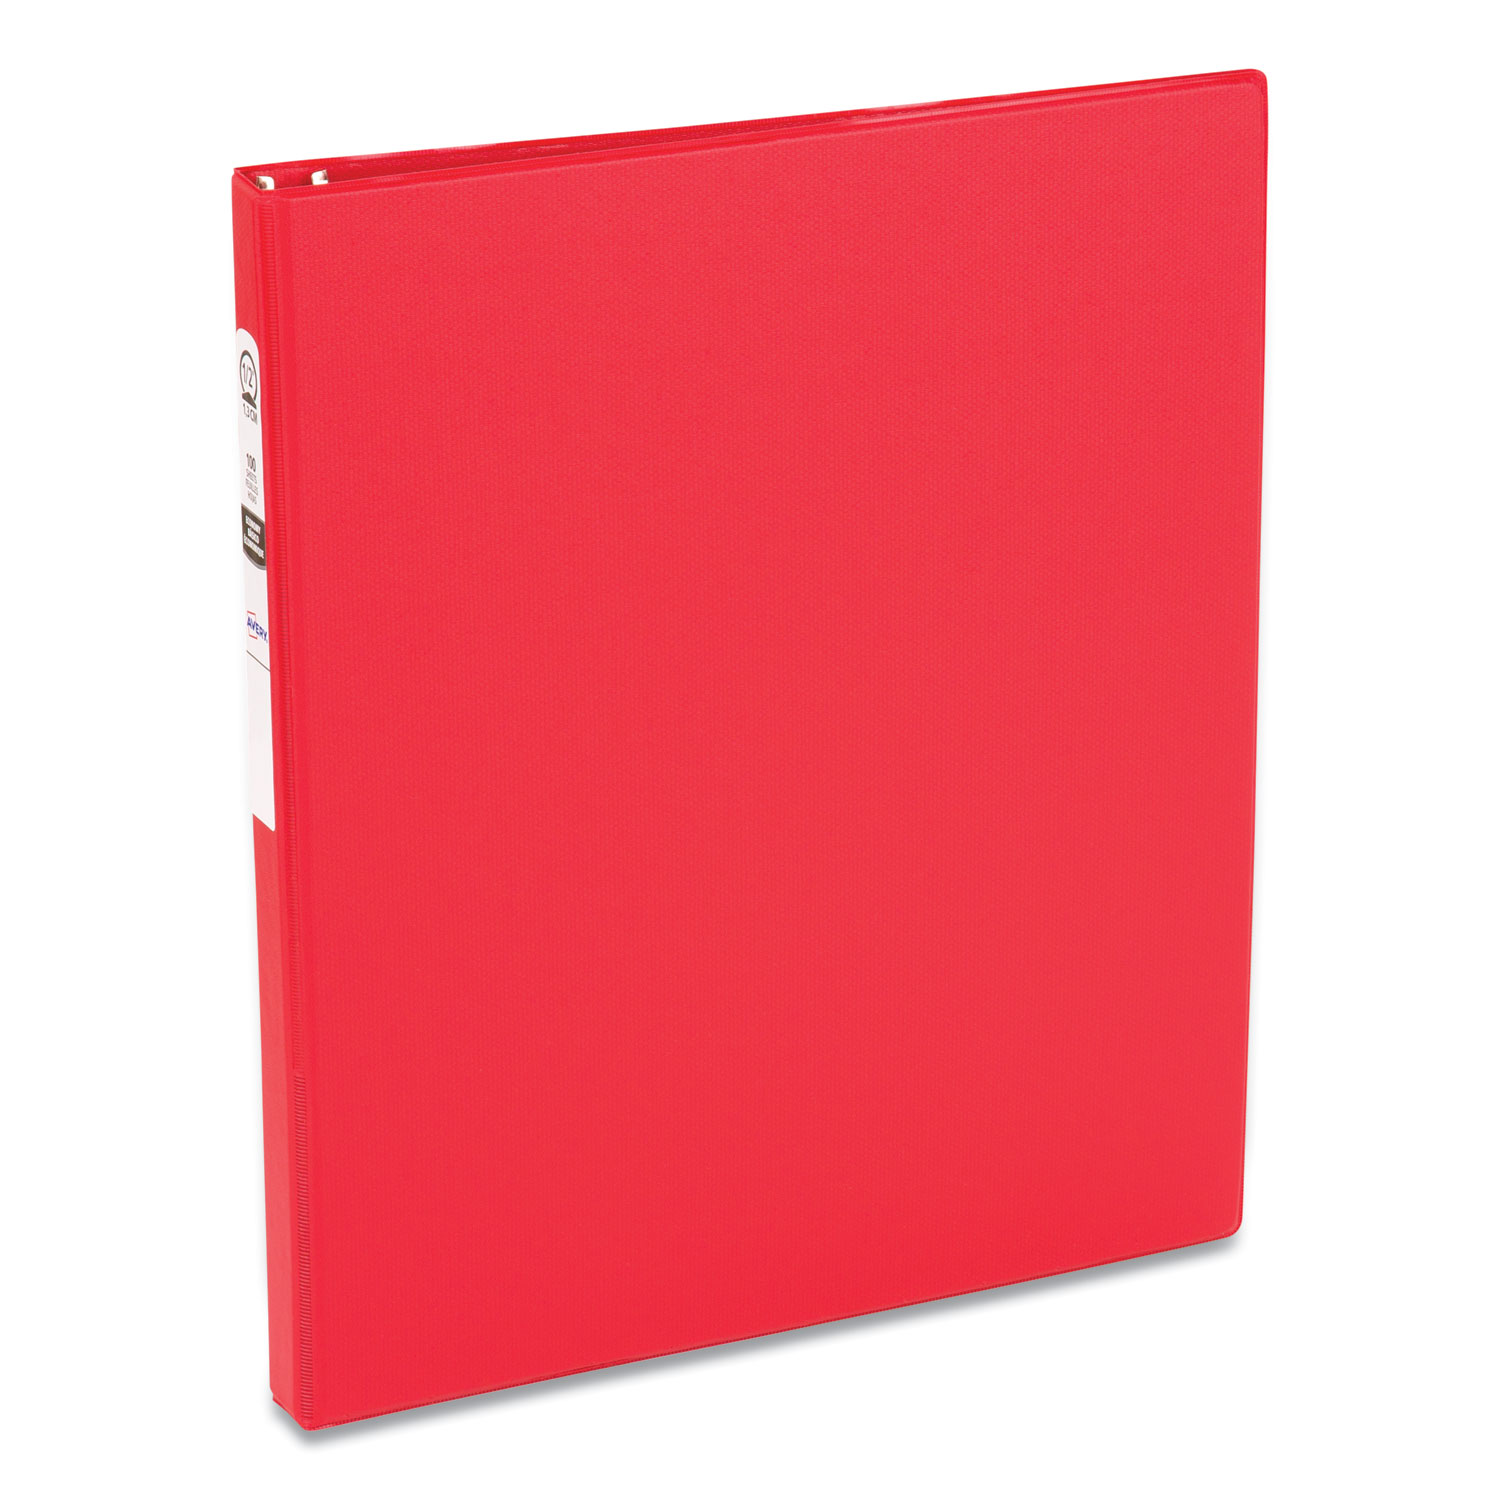  Avery 03210 Economy Non-View Binder with Round Rings, 3 Rings, 0.5 Capacity, 11 x 8.5, Red, (3210) (AVE03210) 